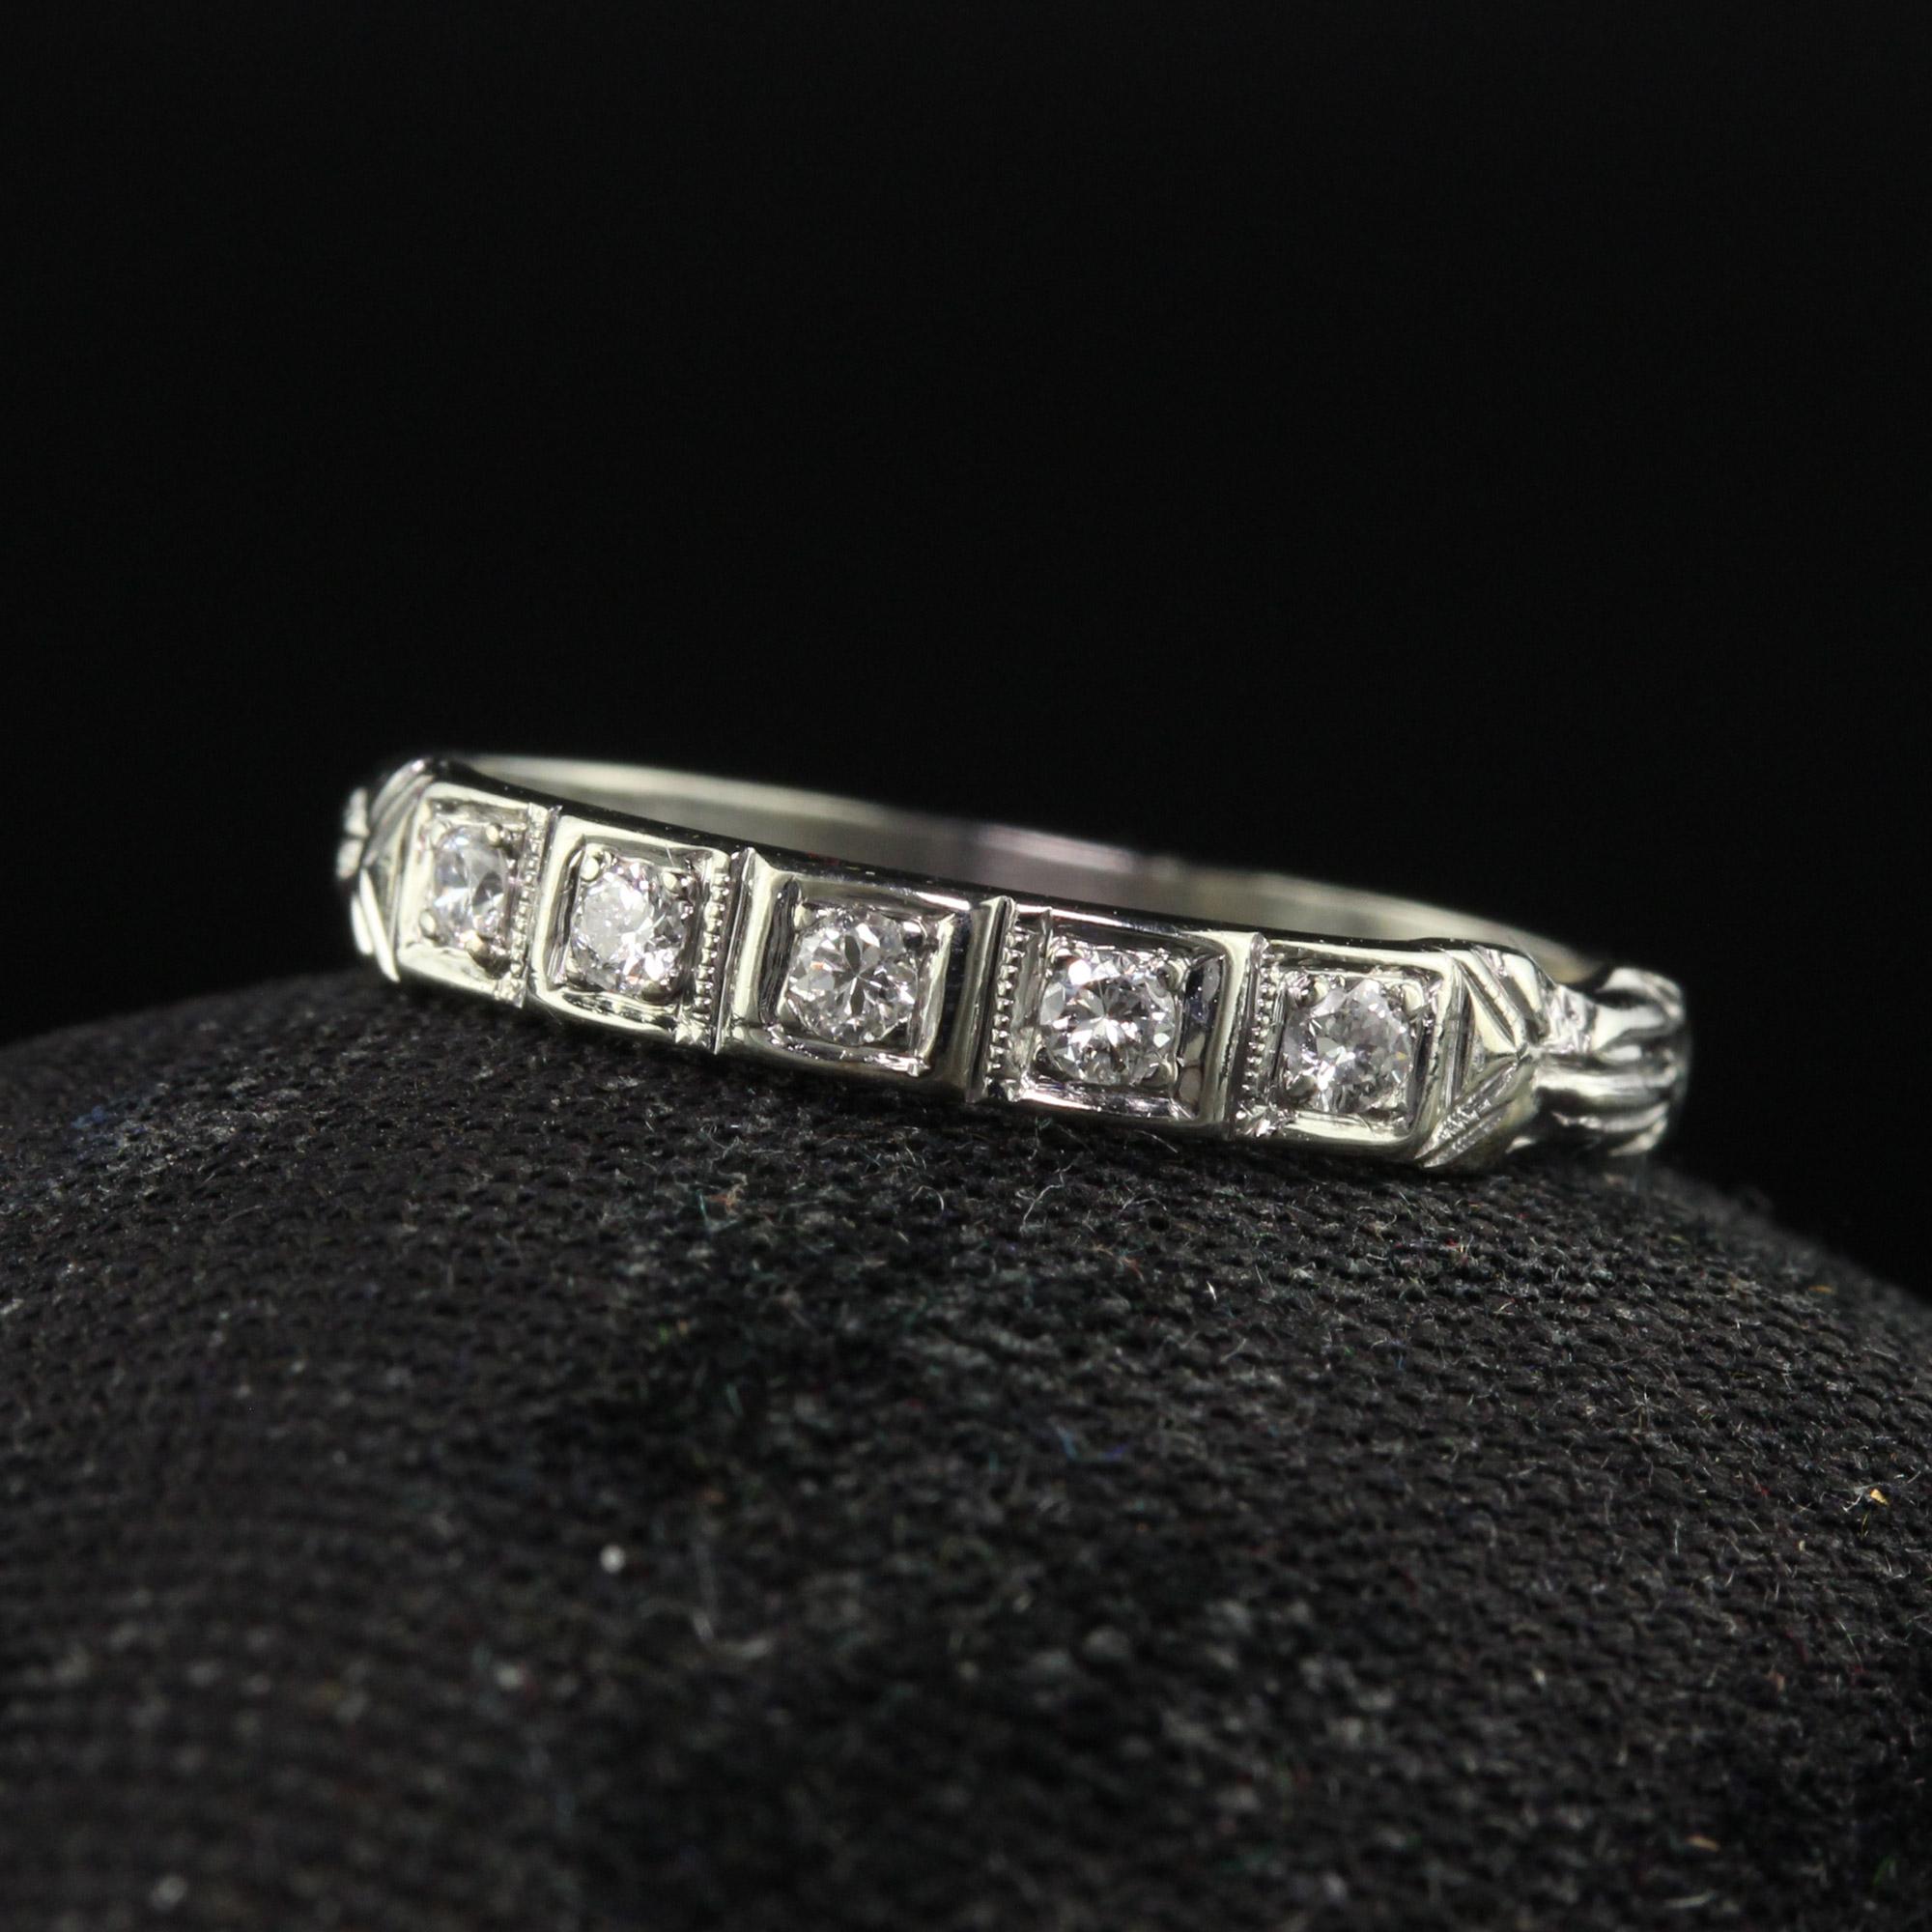 Beautiful Antique Art Deco 18K White Gold Single Cut Diamond Wedding Band - Size 4 1/2. This gorgeous wedding band is crafted in 18k white gold. The top has single cut diamonds set across it with engraved accents on each side. The ring is in good